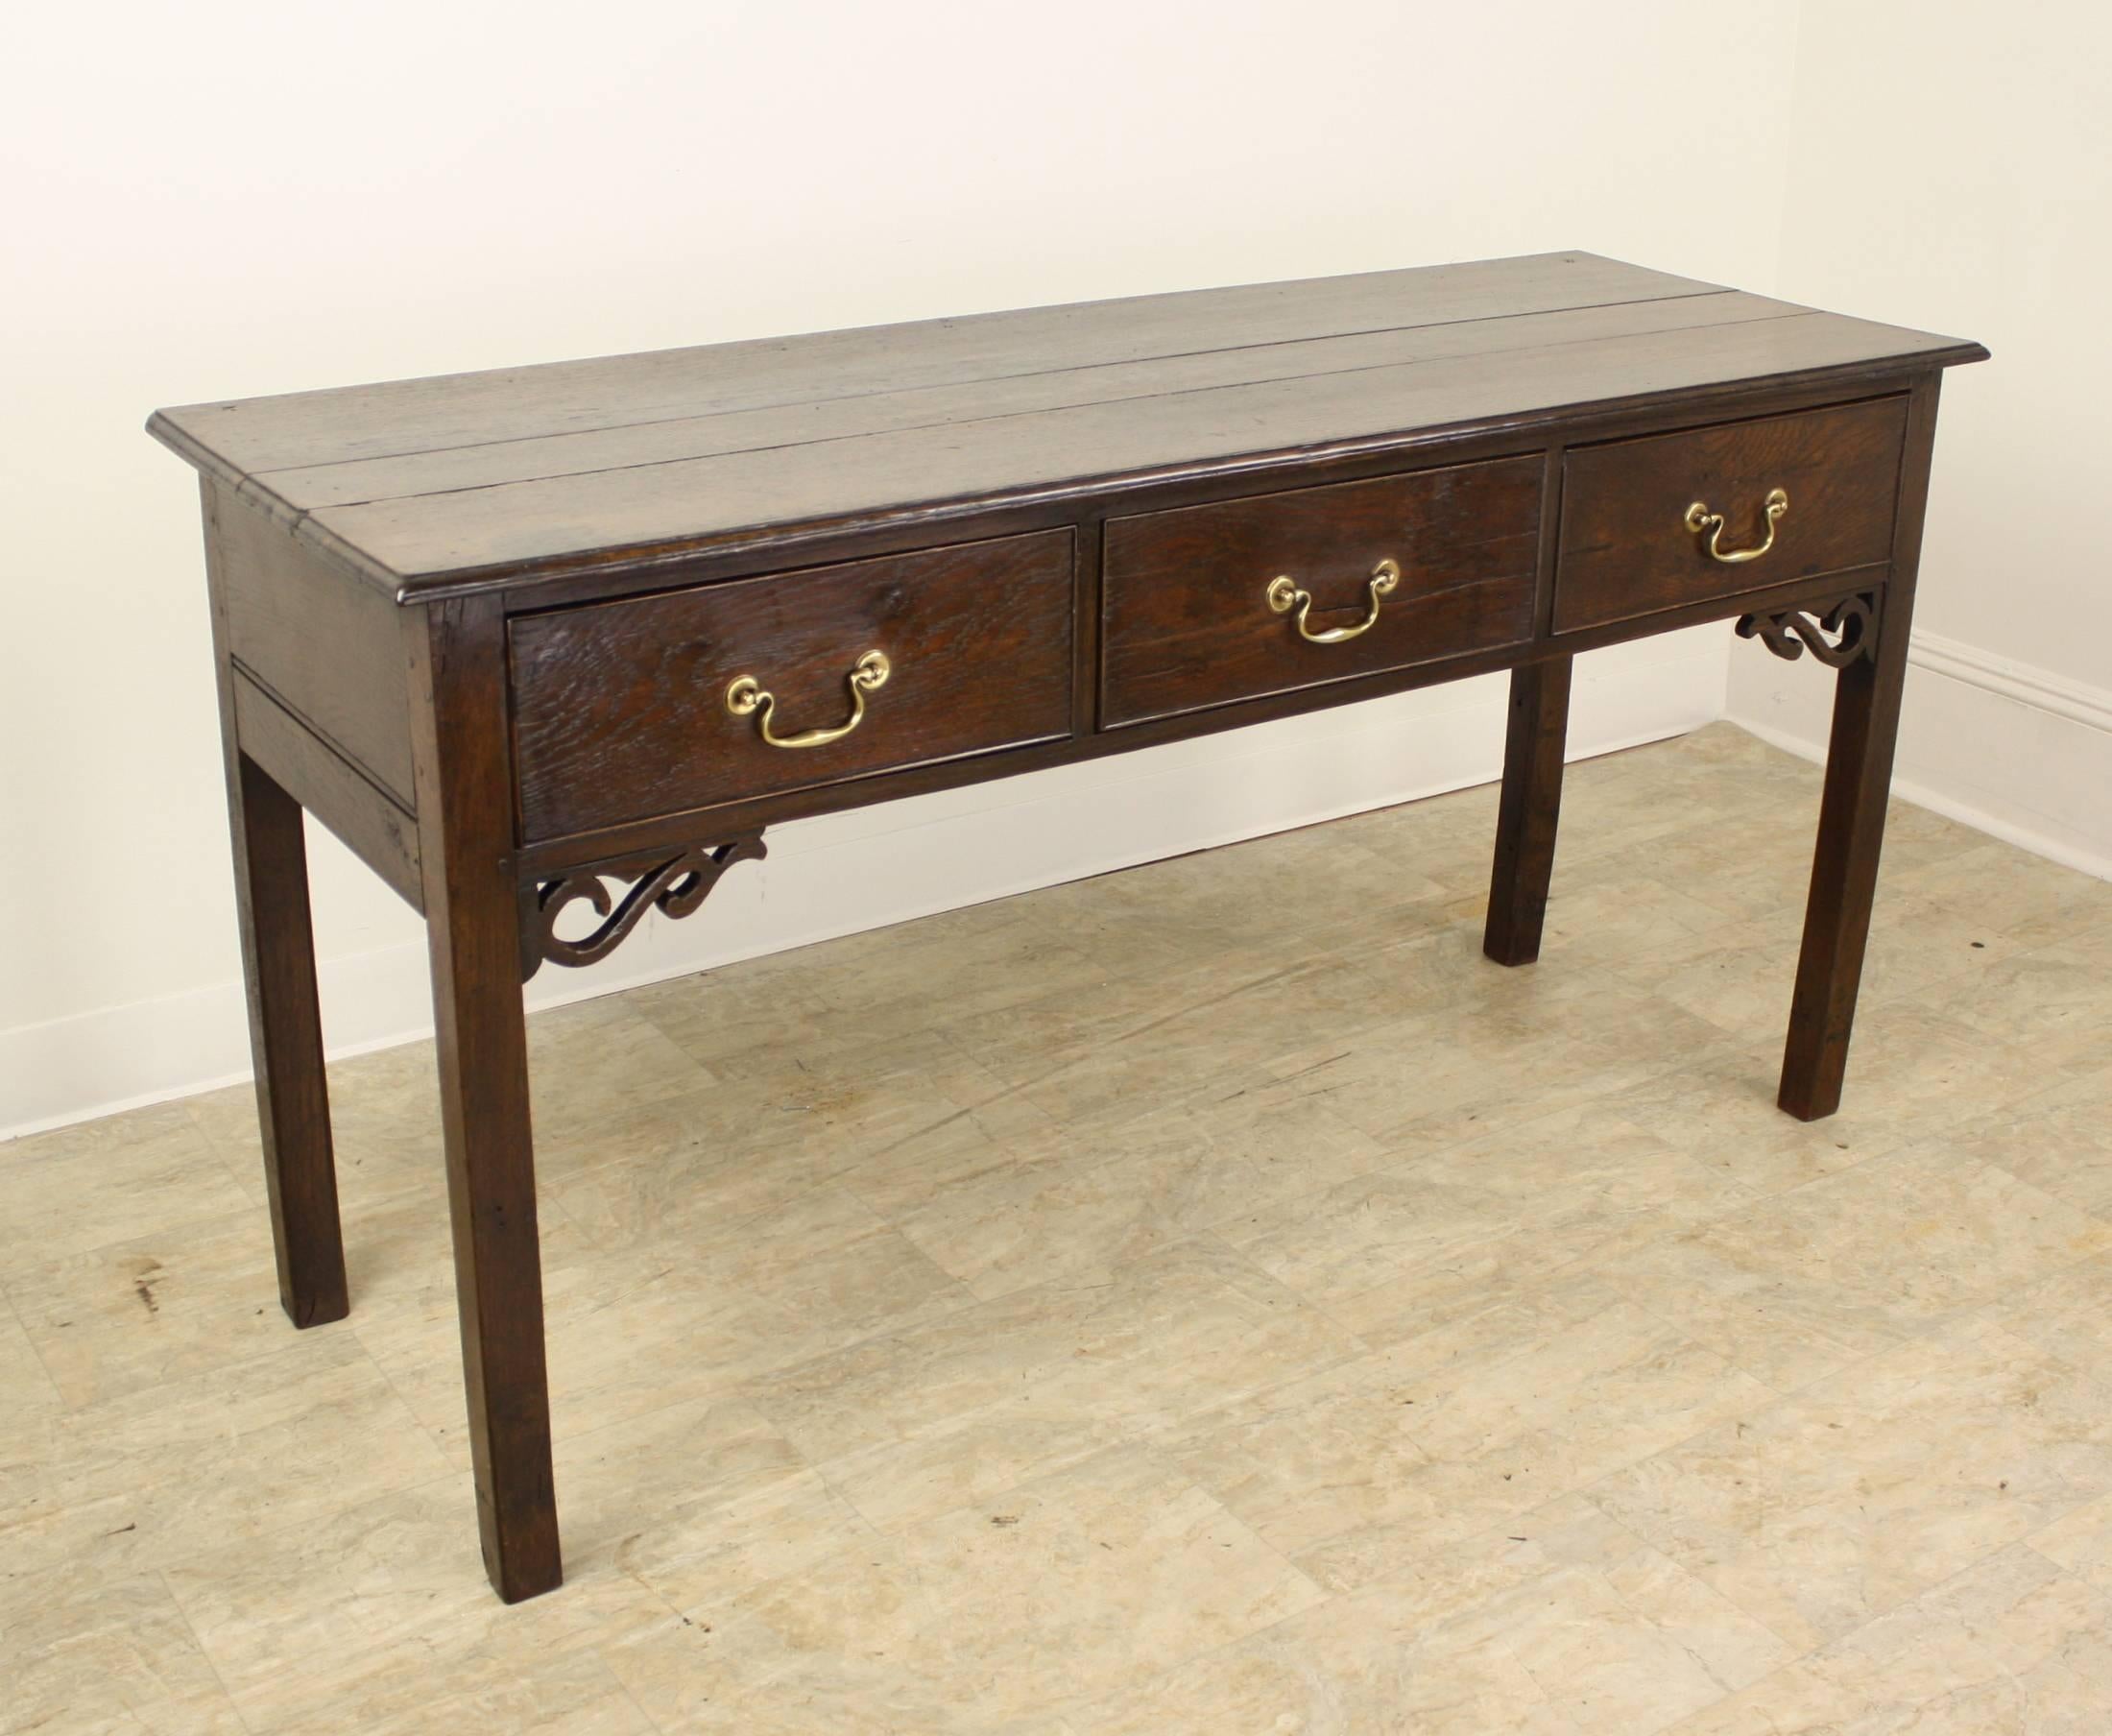 A glorious smaller server, with fine patinated oak grain and delightful fretted details at the corners. Three generous drawers, period appropriate square legs and solid brass hardware complete the look.